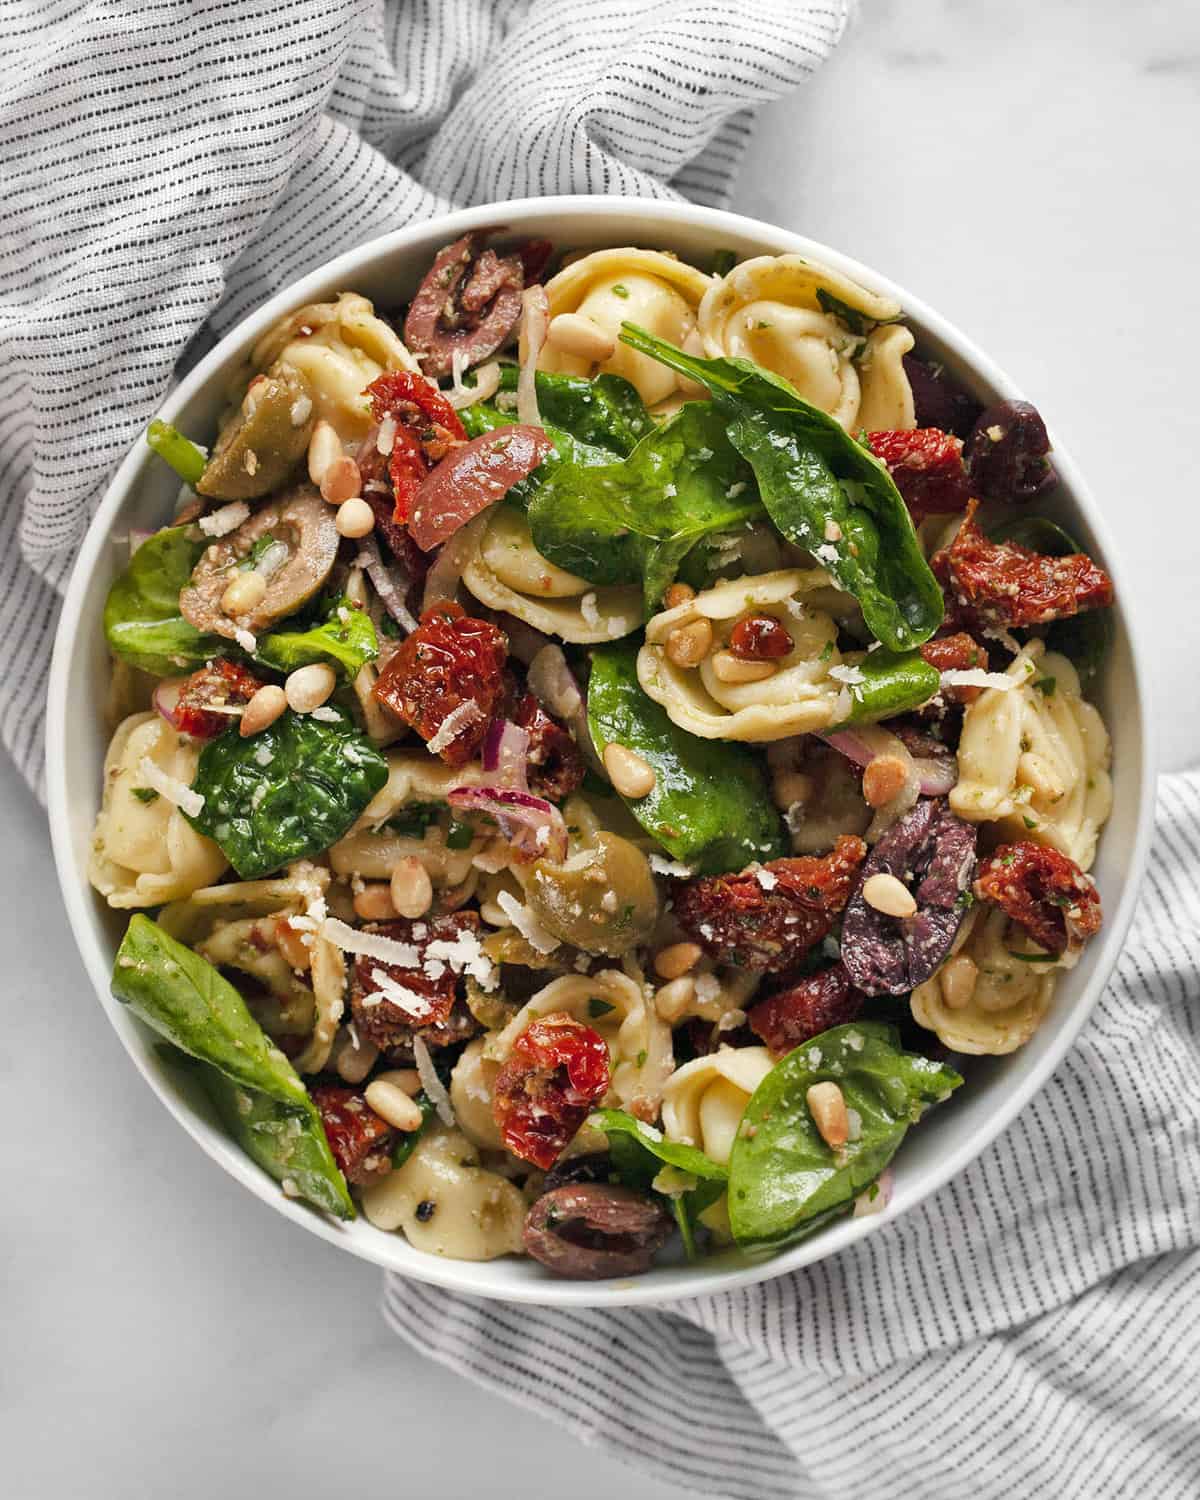 Pasta salad with sun dried tomatoes, olives and spinach in a small bowl.